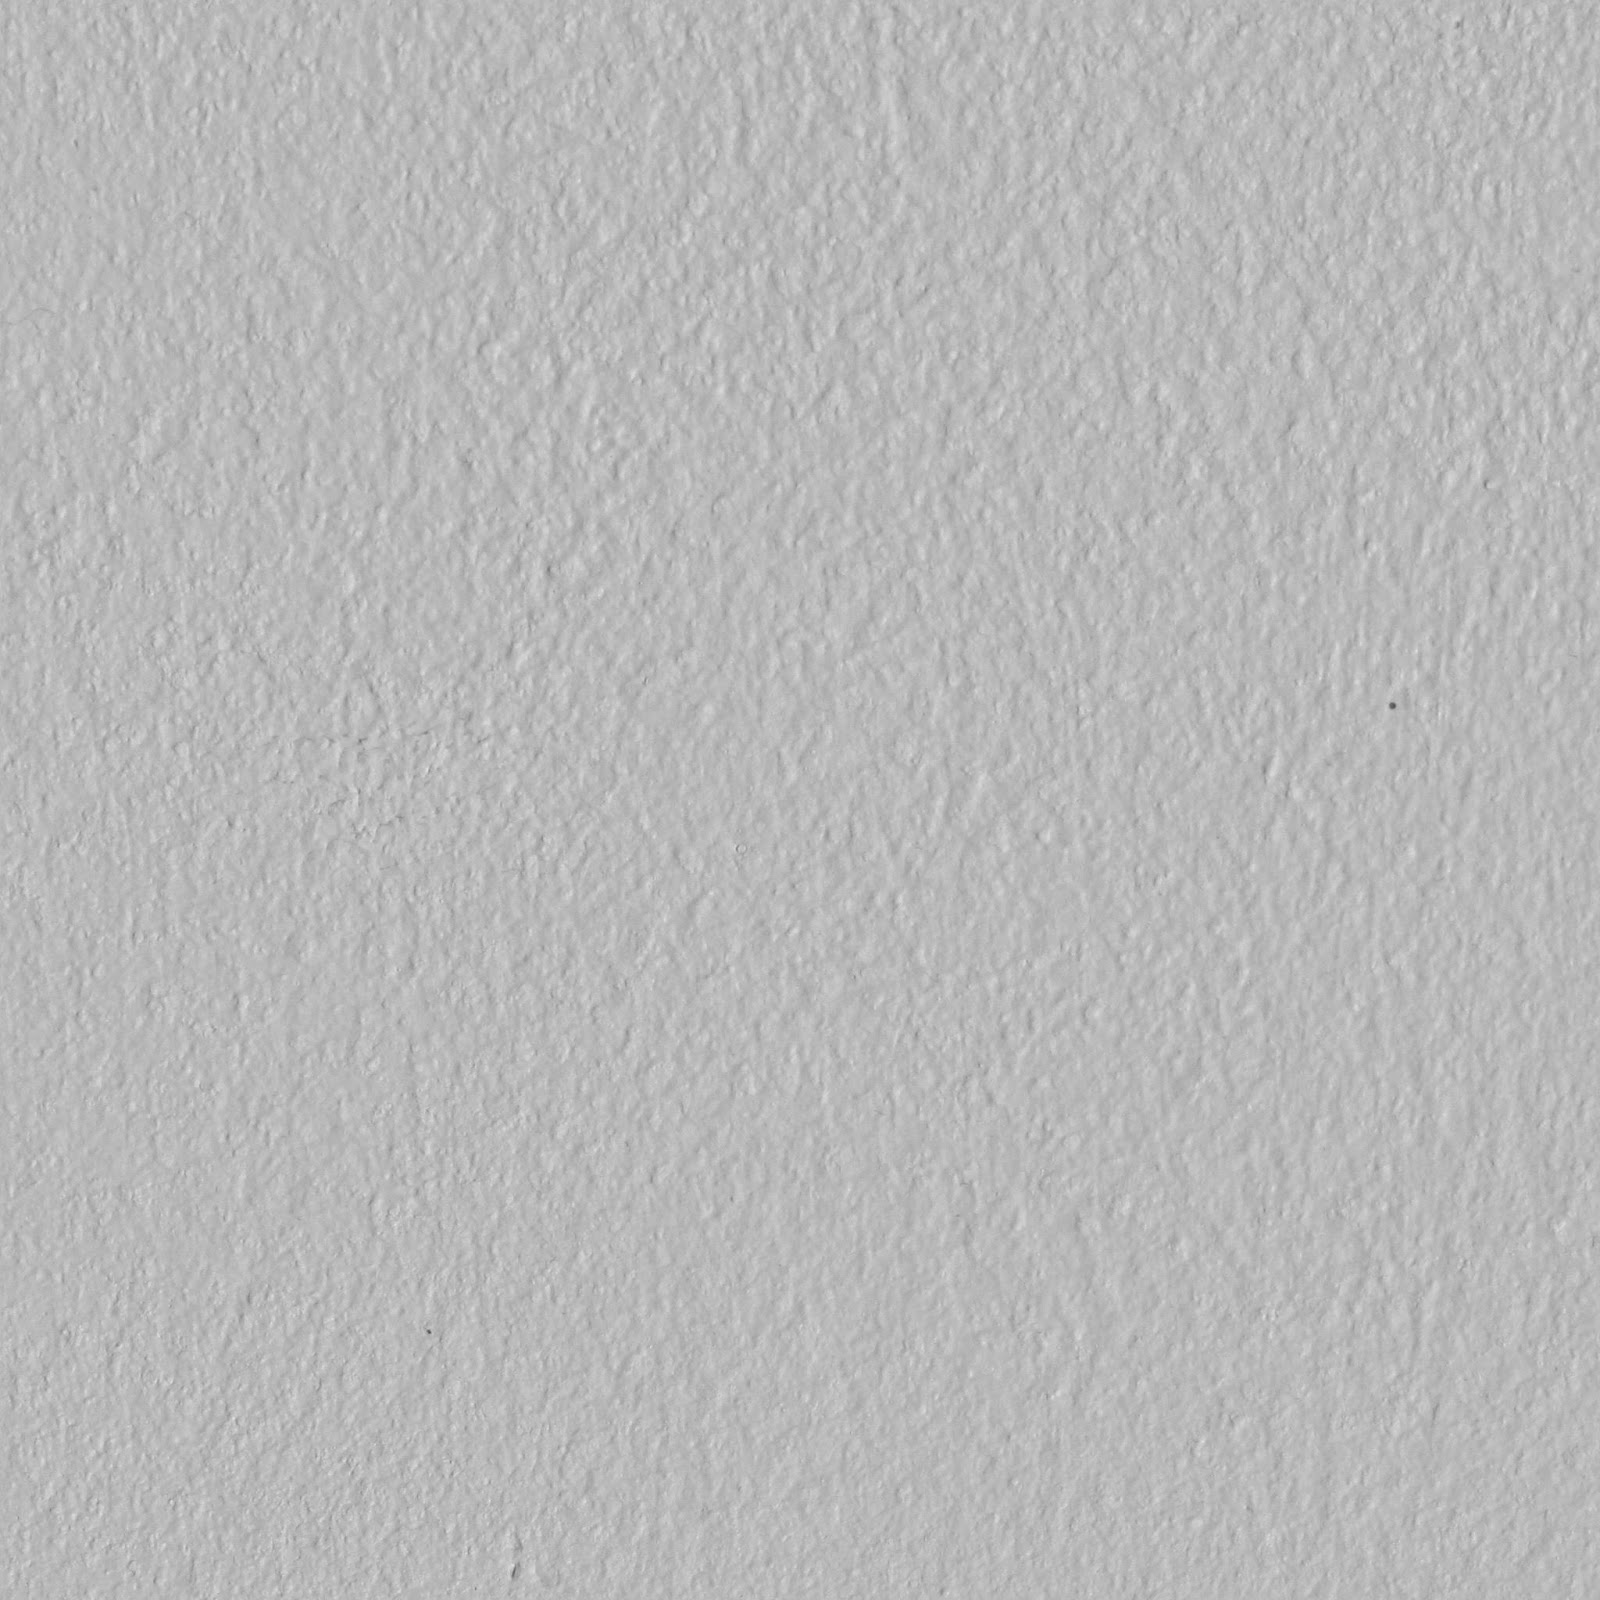 High Resolution Seamless Textures Tileable Stucco Wall Texture 1